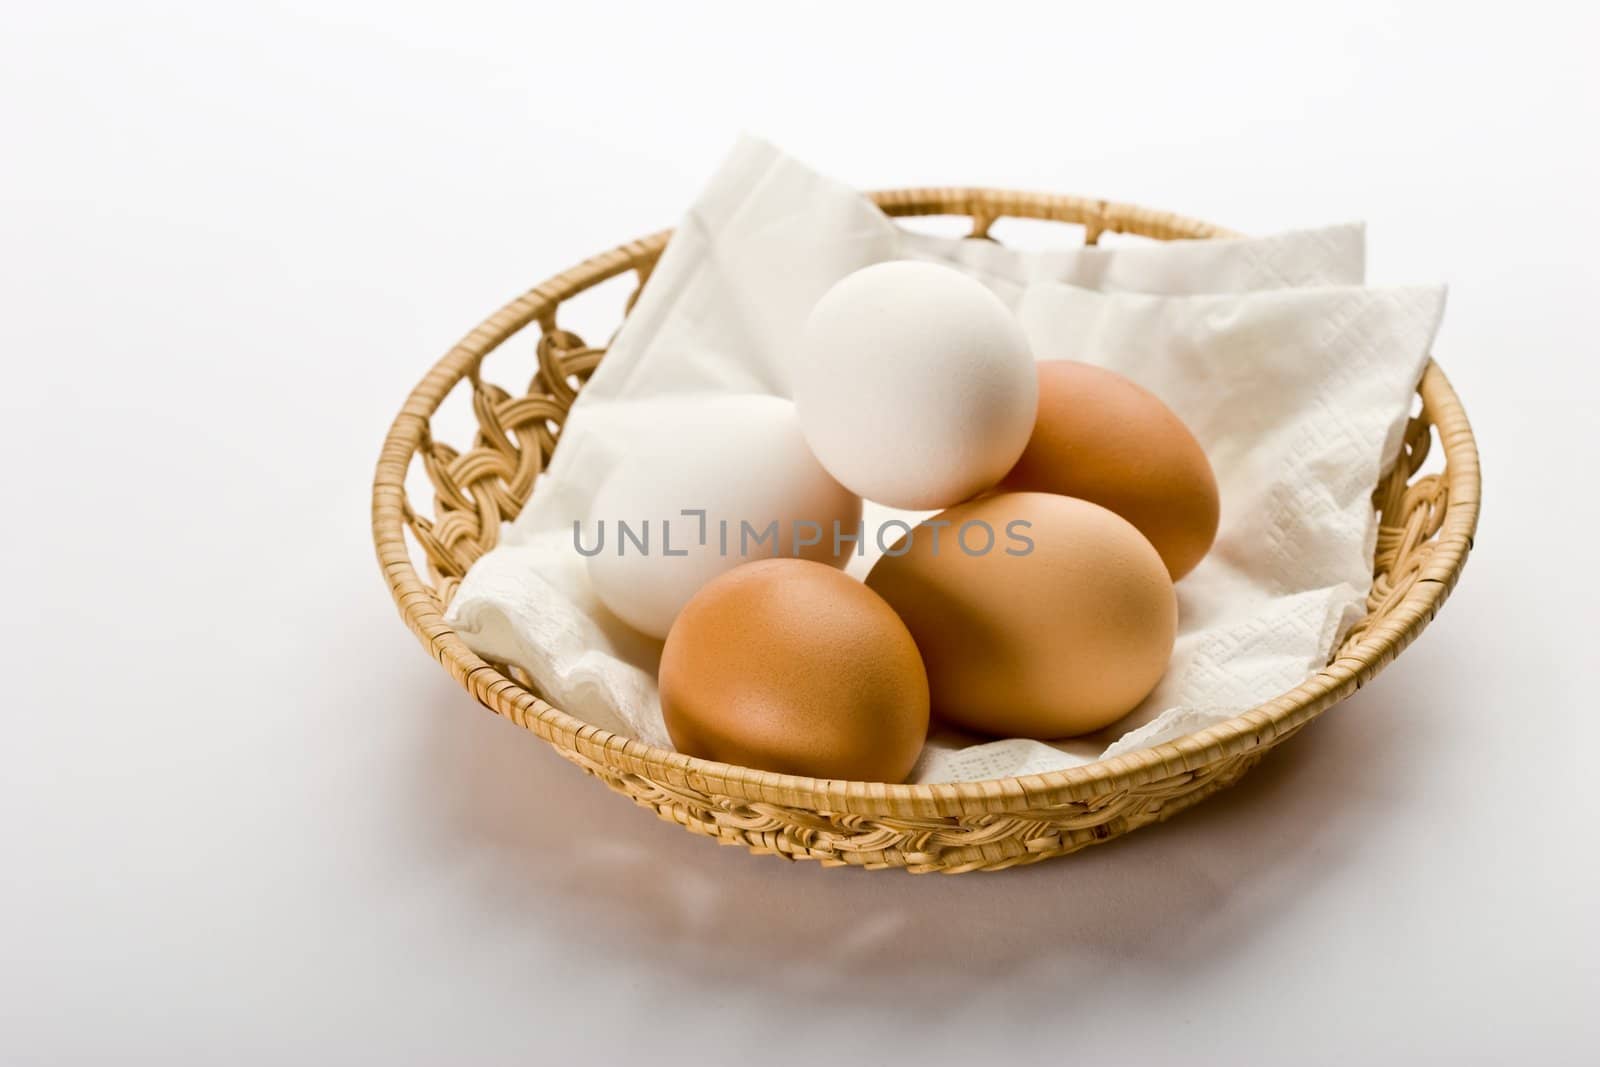 some eggs on the basket over white